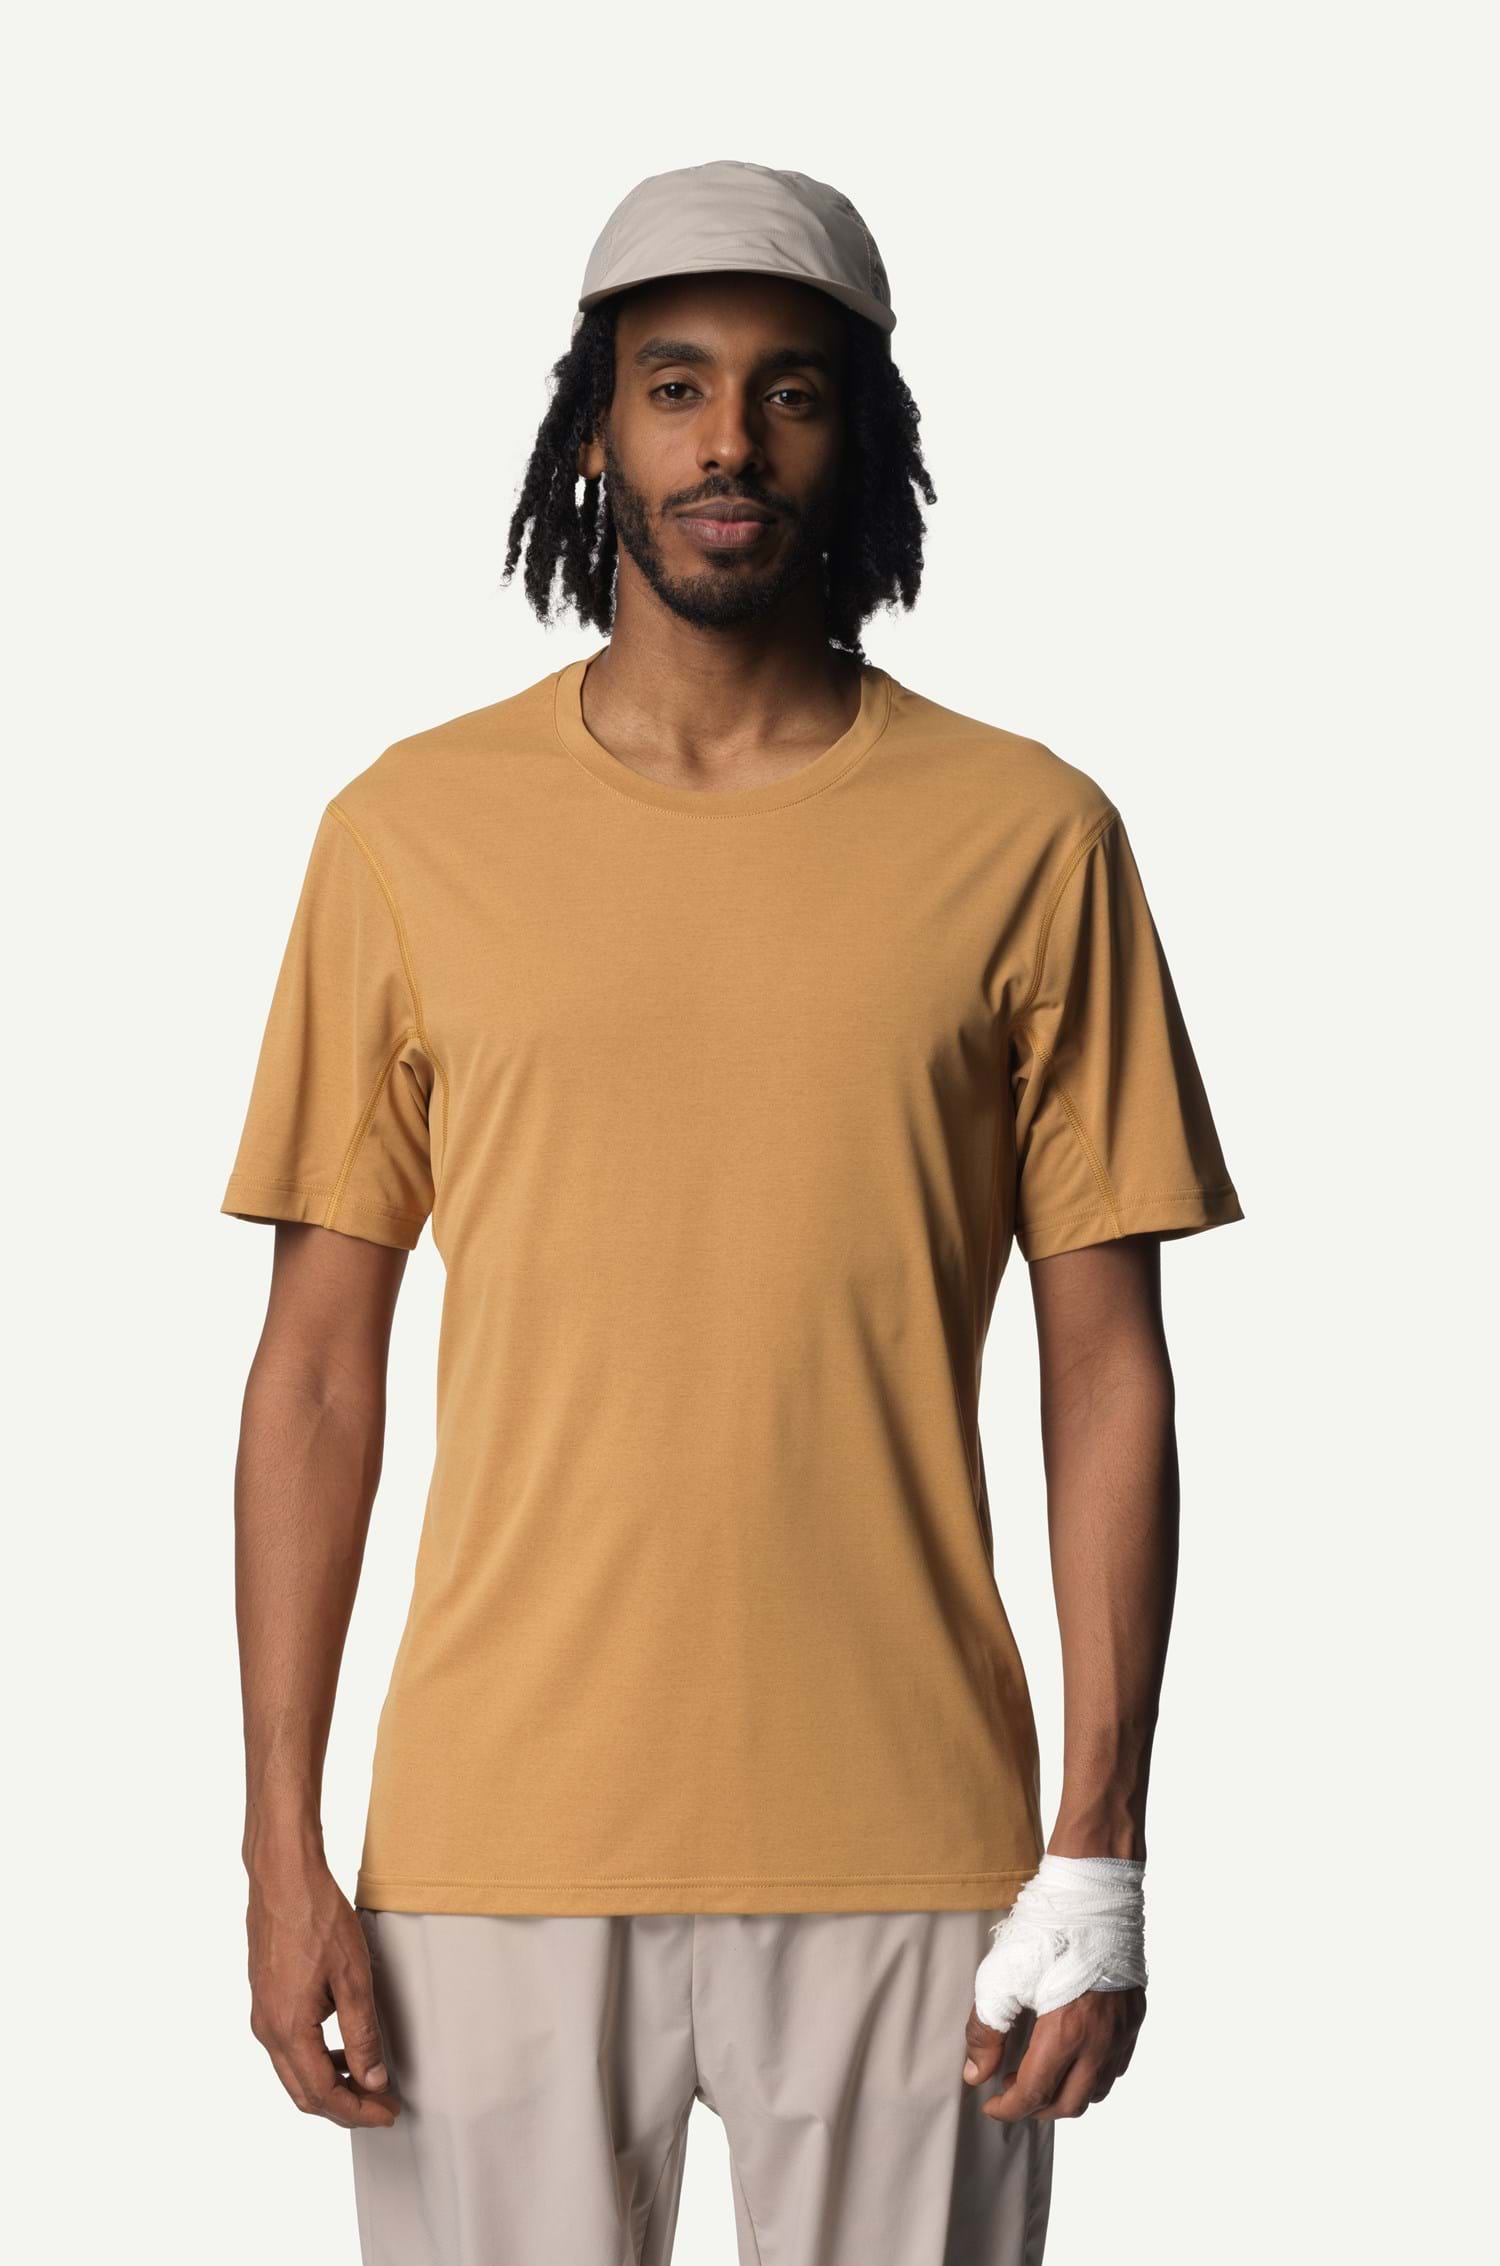 Move at your own pace' Men's Premium T-Shirt